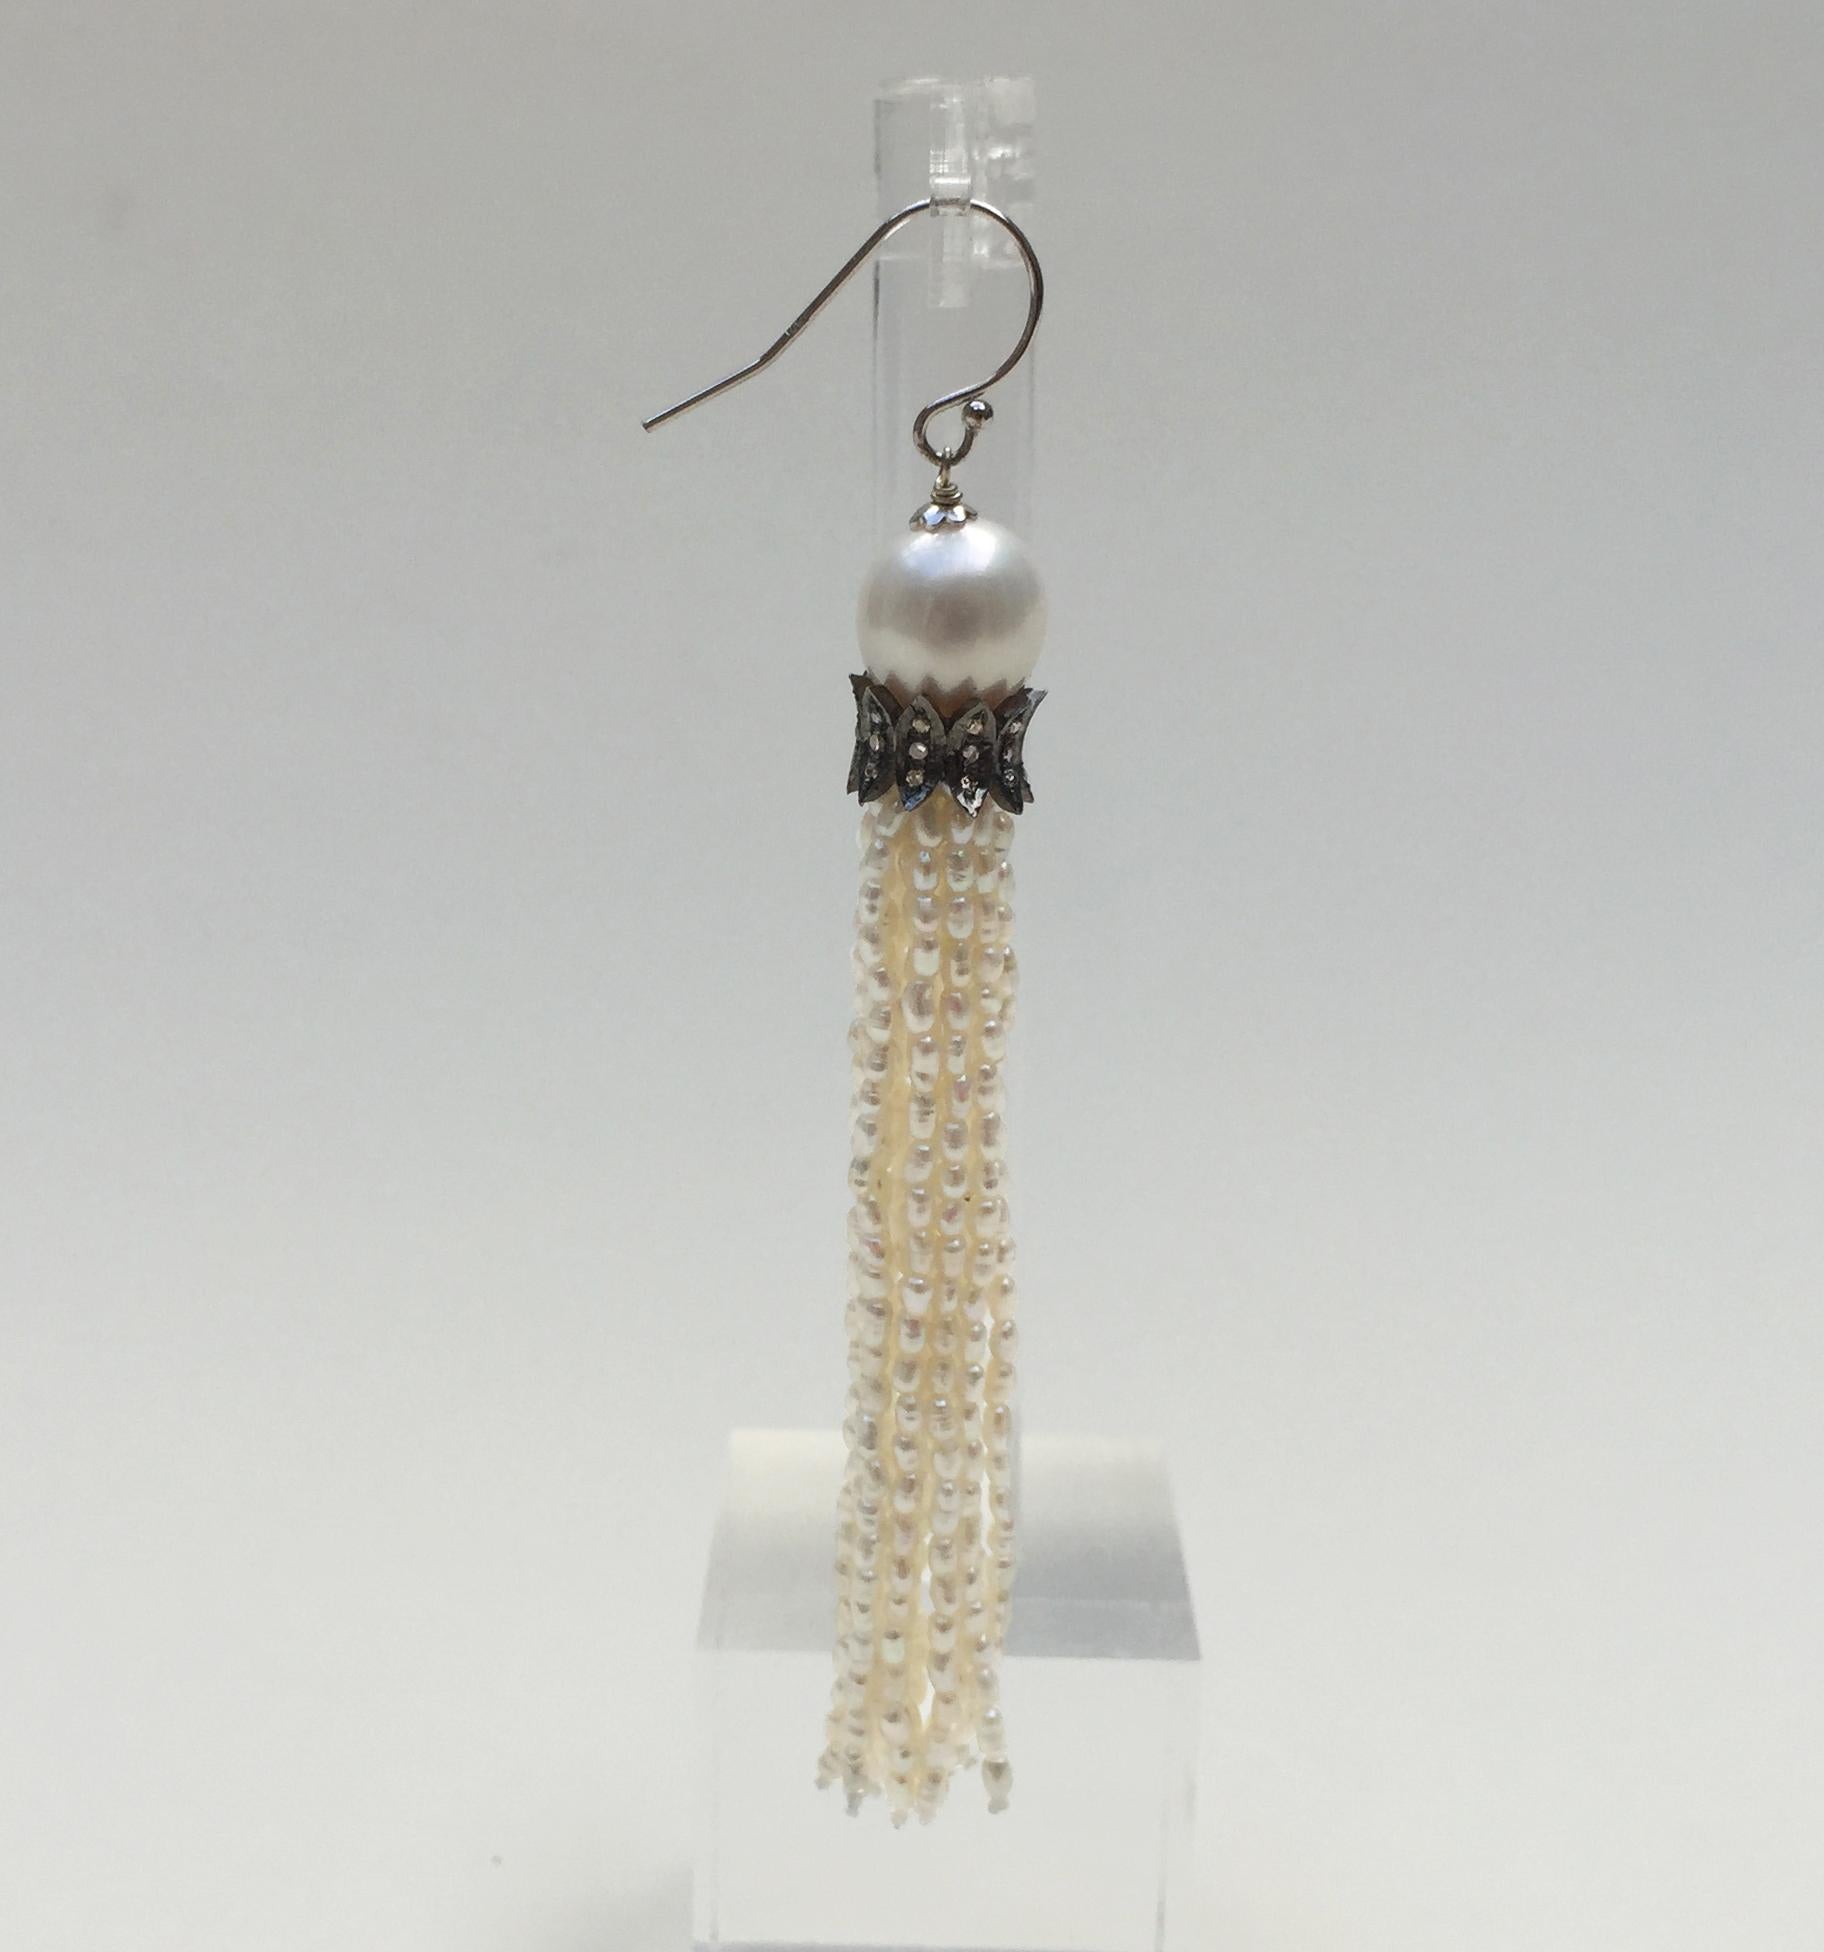 These white rice pearl tassel earrings with diamonds and 14k white gold hooks are elegant. Handmade by Marina J., these tassel earrings start with a glowing white round pearl. Holding the tassel together is a stylized diamond encrusted roundel made